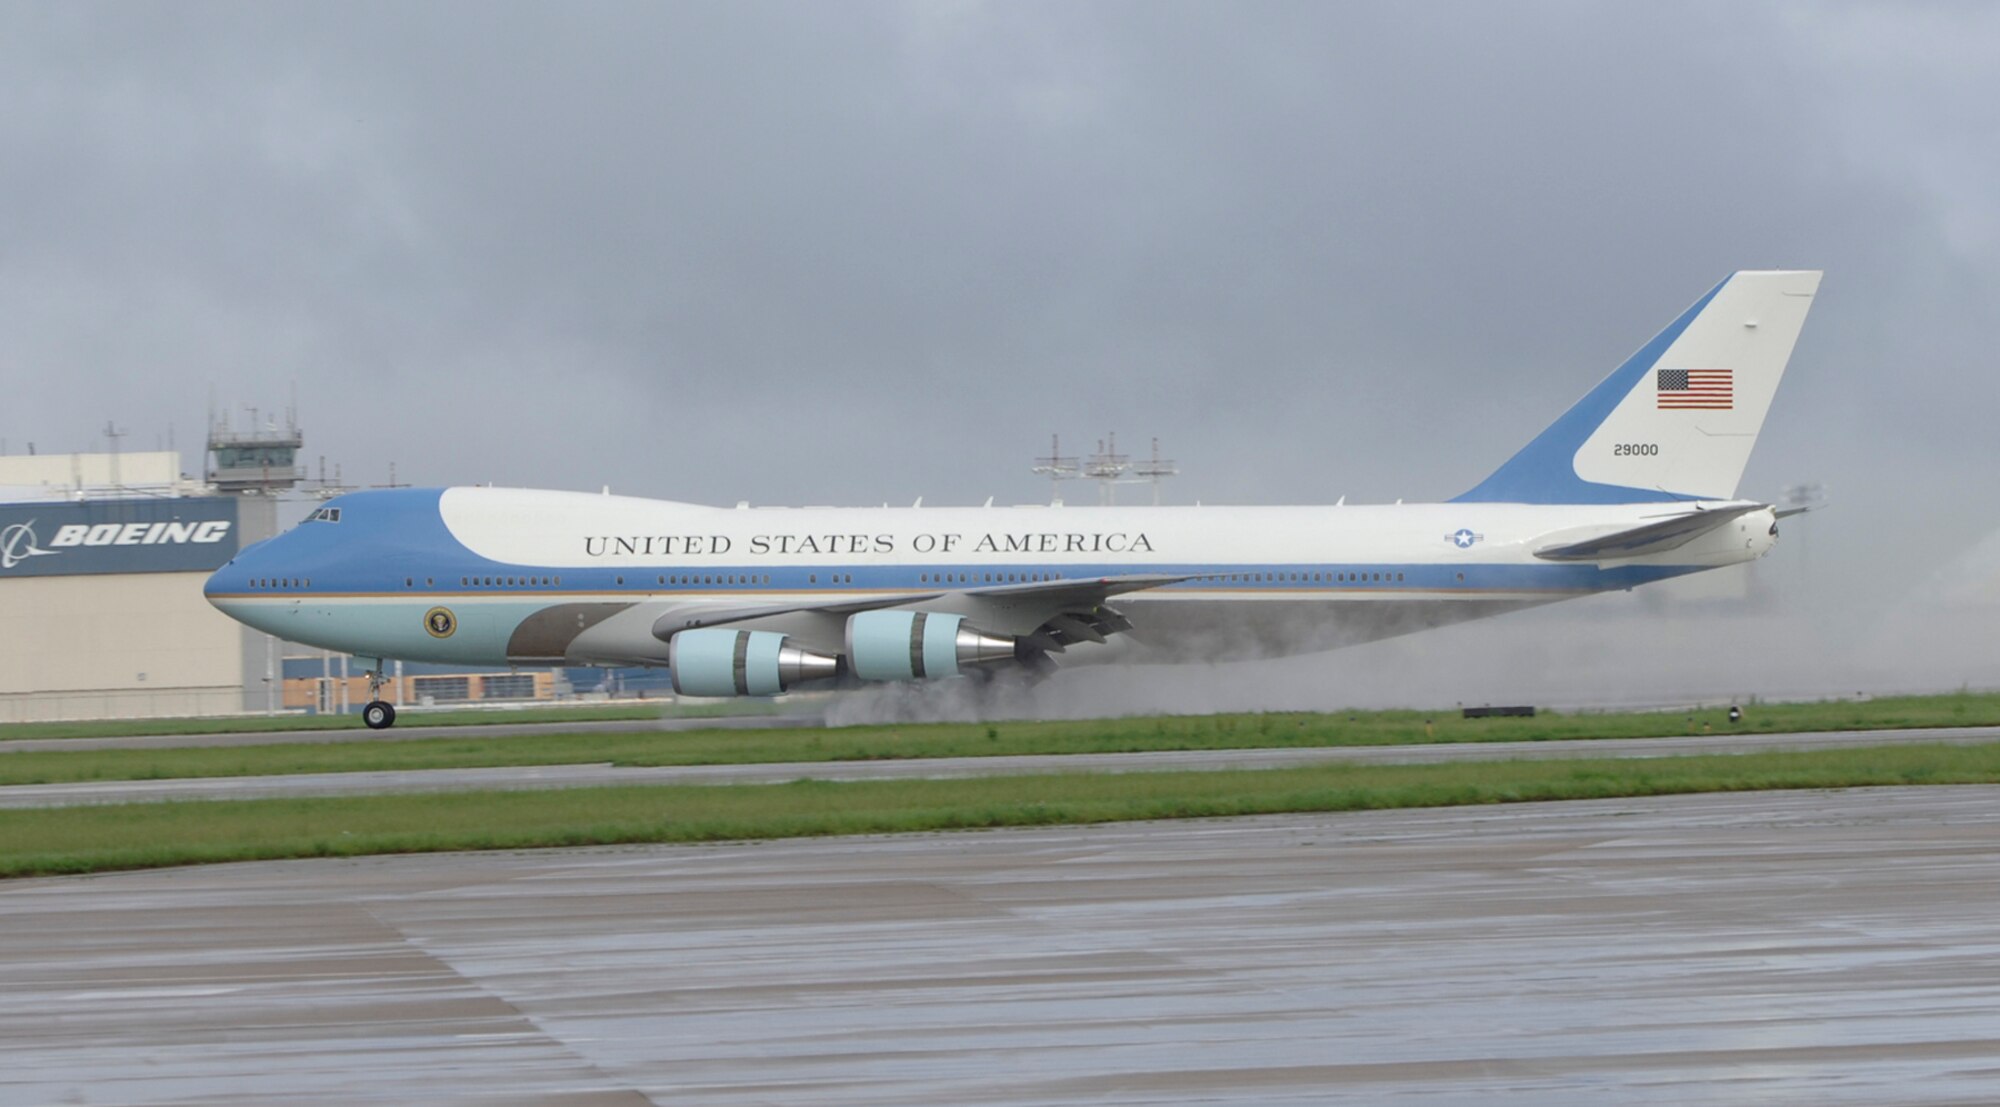 Air Force One touches down at McConnell Air Force Base Kan., May 9. The base served as a transiting point for President George W. Bush, who was on his way to meet with victims of the Greensburg, Kan., tornado disaster. Greensburg is approximately 120 miles west of the base and was struck by a tornado May 4. (Photo by Senior Airman Jamie Train)